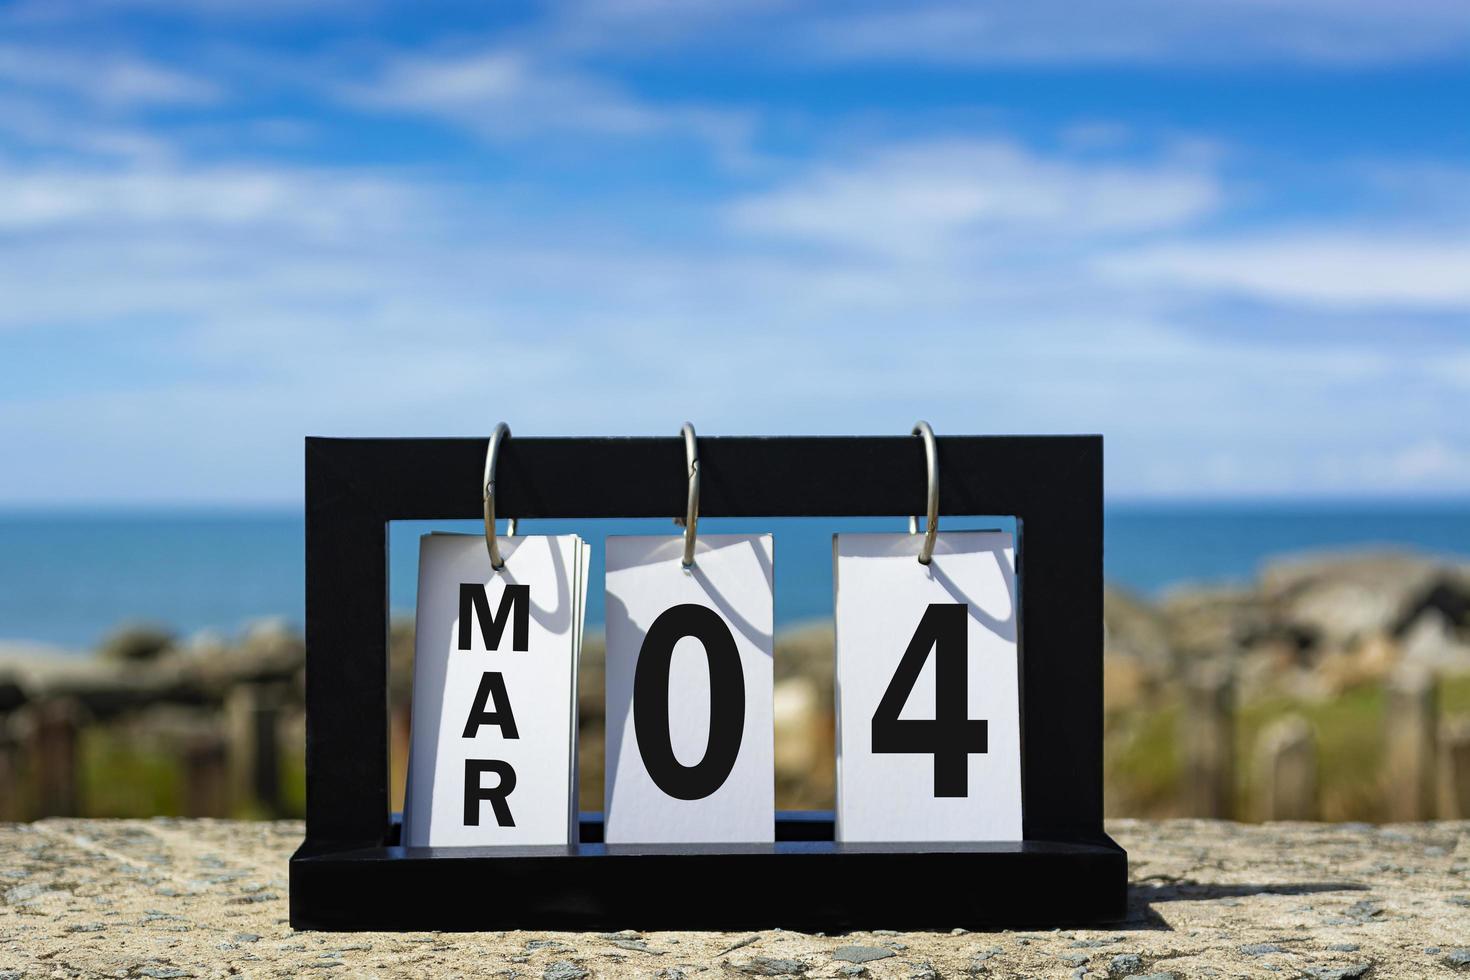 Mar 04 calendar date text on wooden frame with blurred background of ocean photo